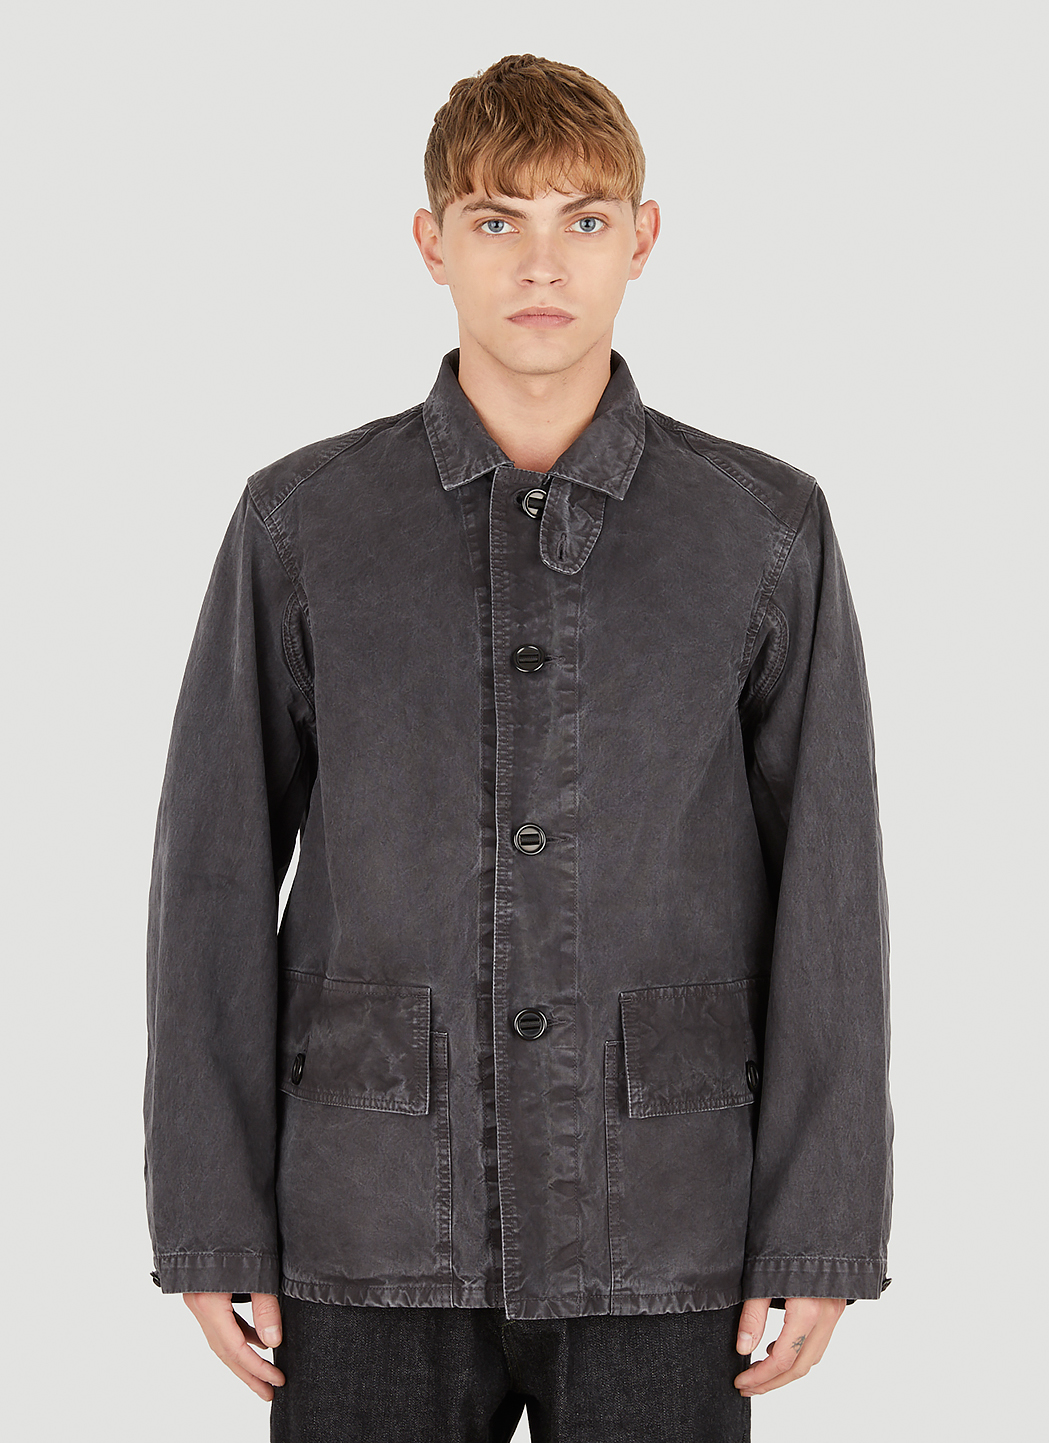 Applied Art Forms Chore Jacket